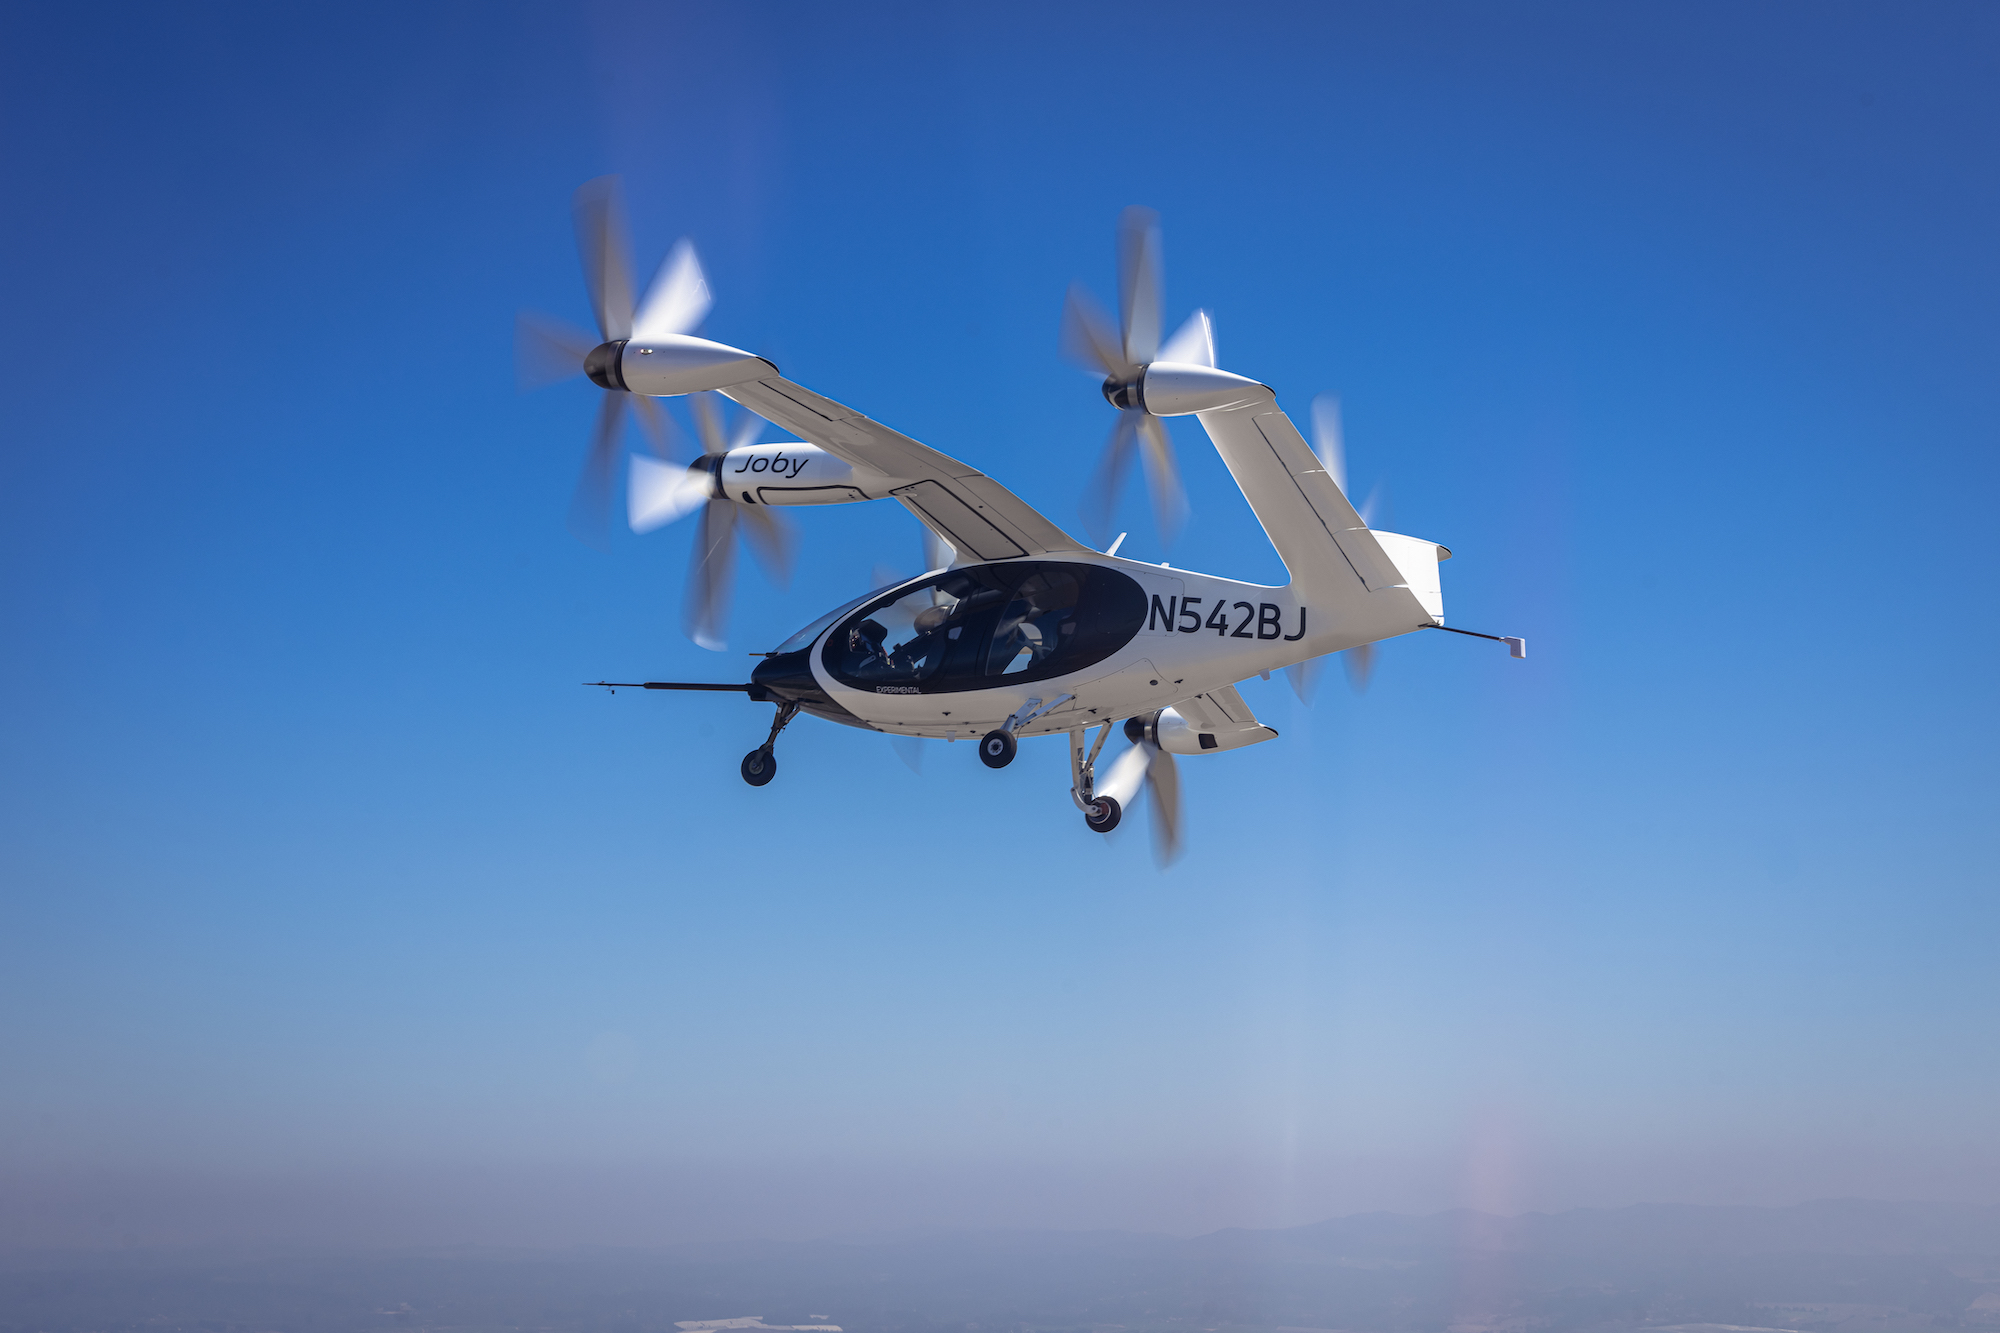 The air taxi relies on six tilting propellers and electric motors to fly. 